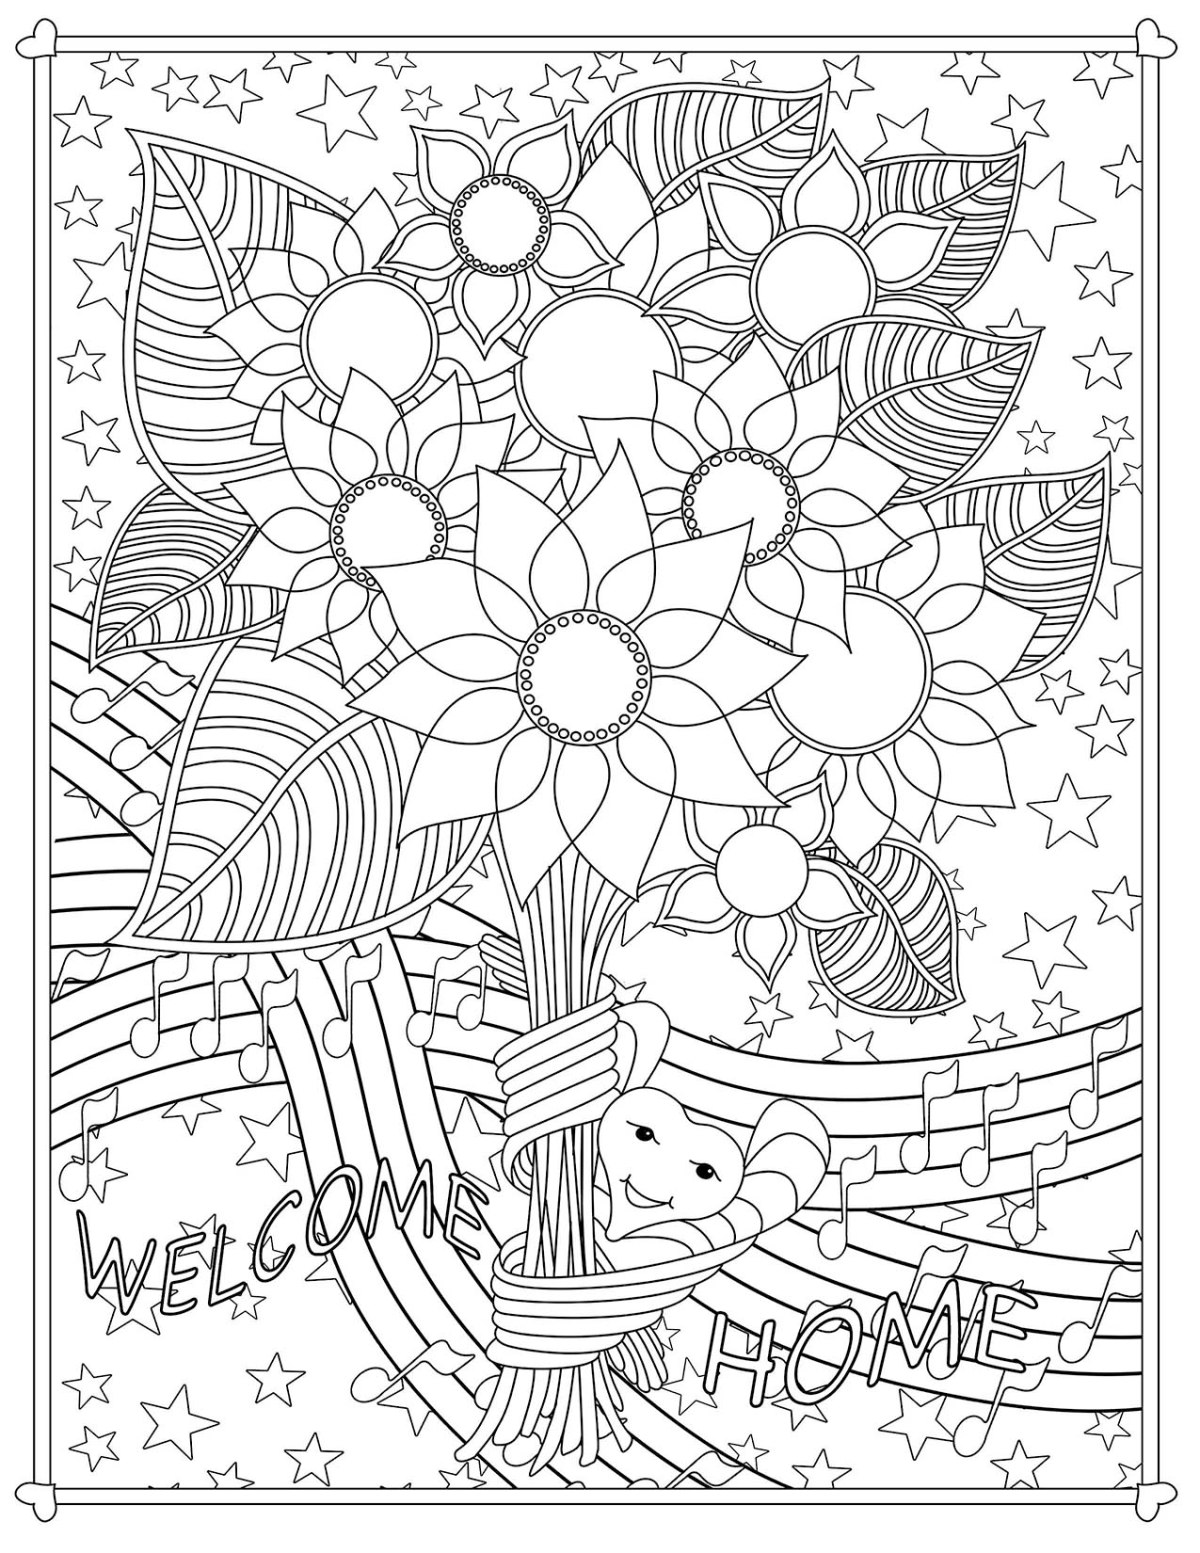 WelcomeHomeBouquet-coloringpage-music-curves-150